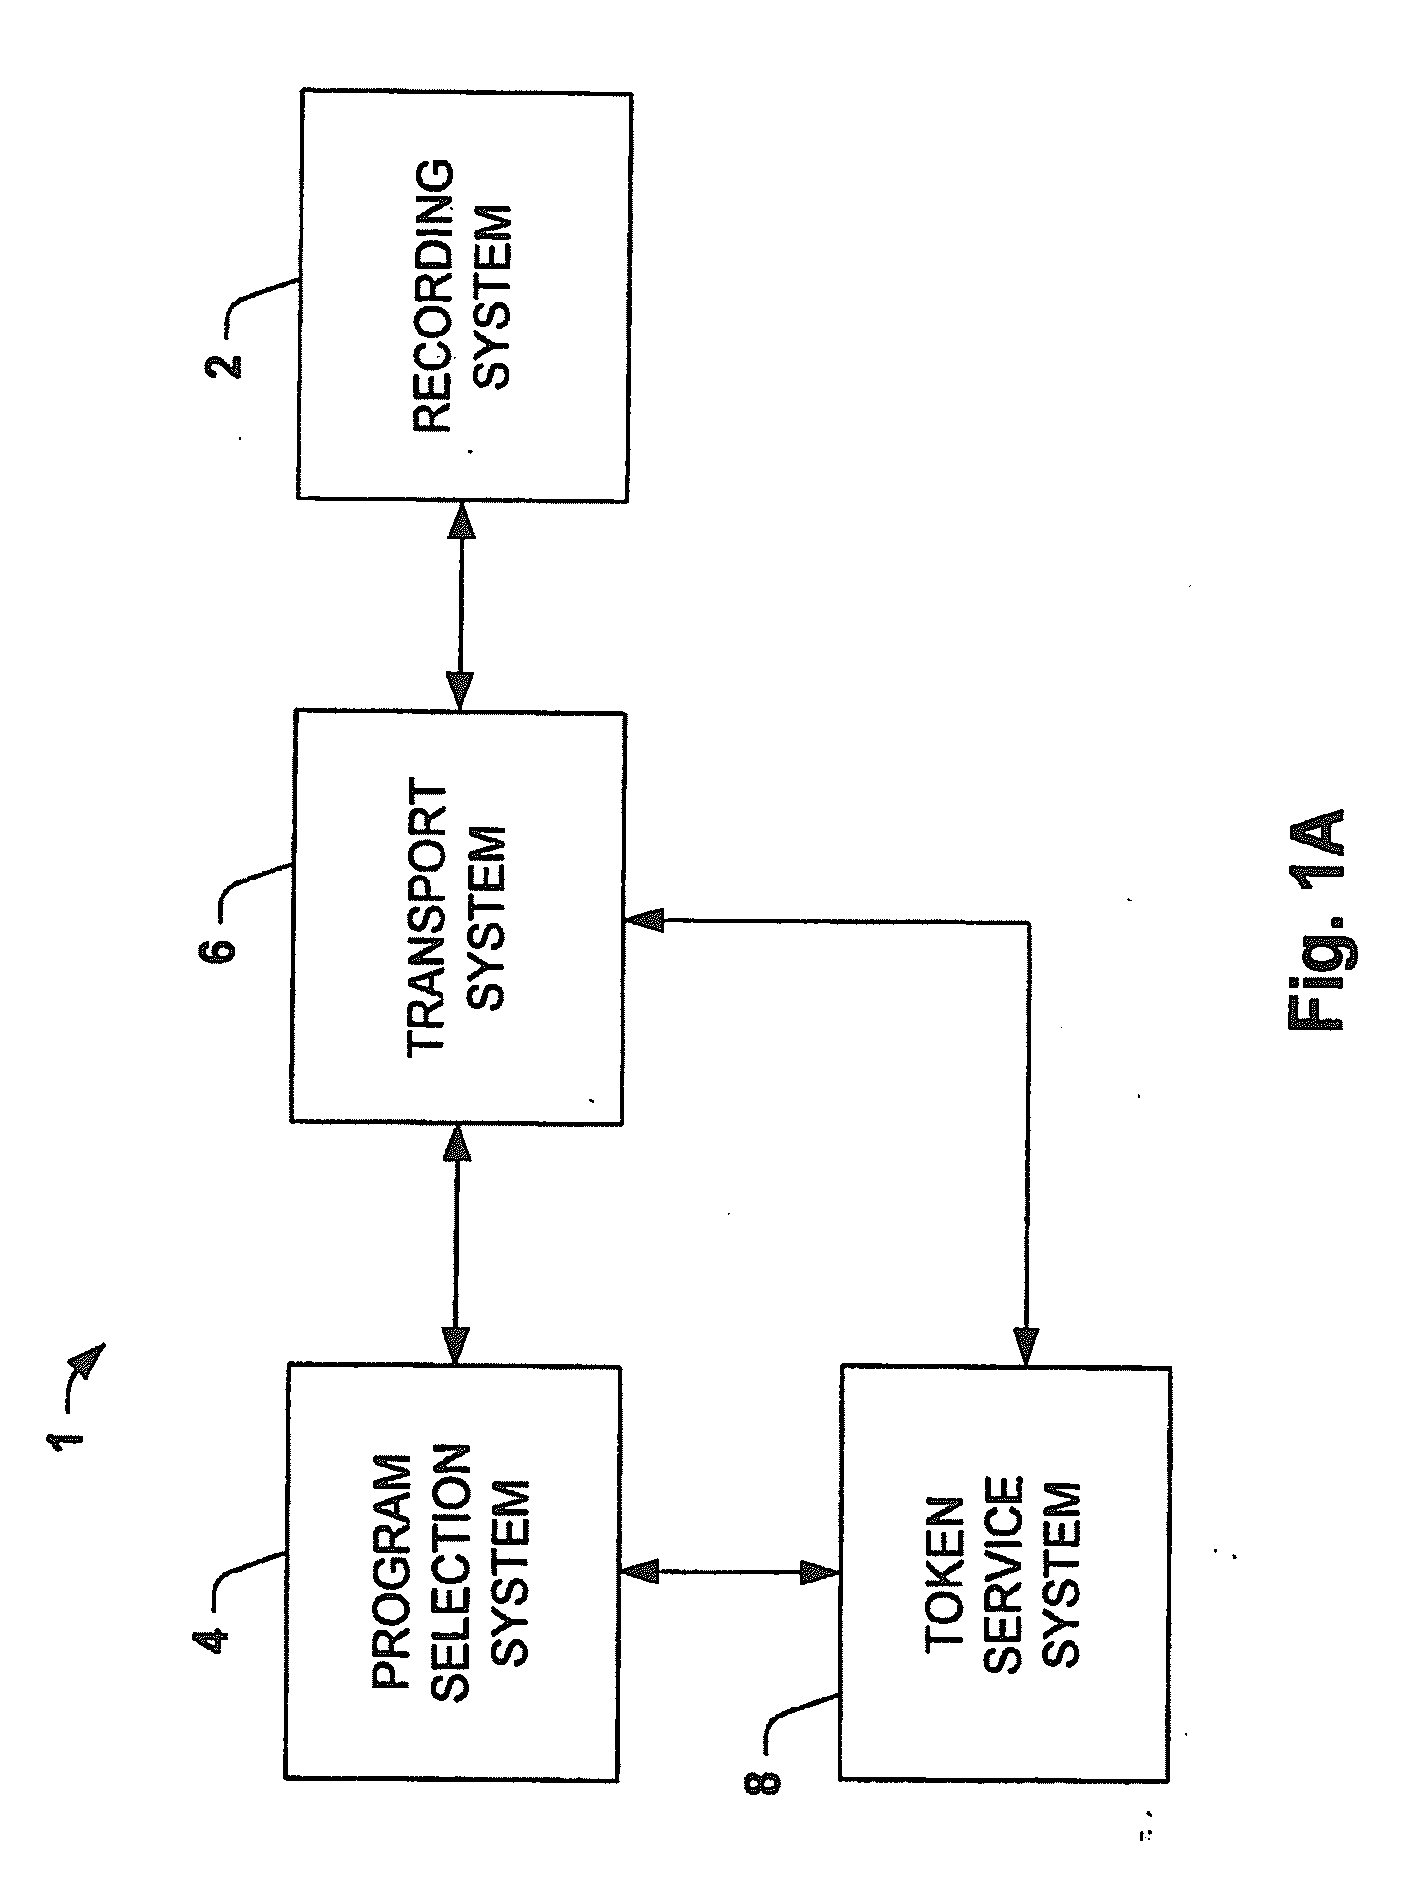 System and method for providing program criteria representing audio and/or visual programming